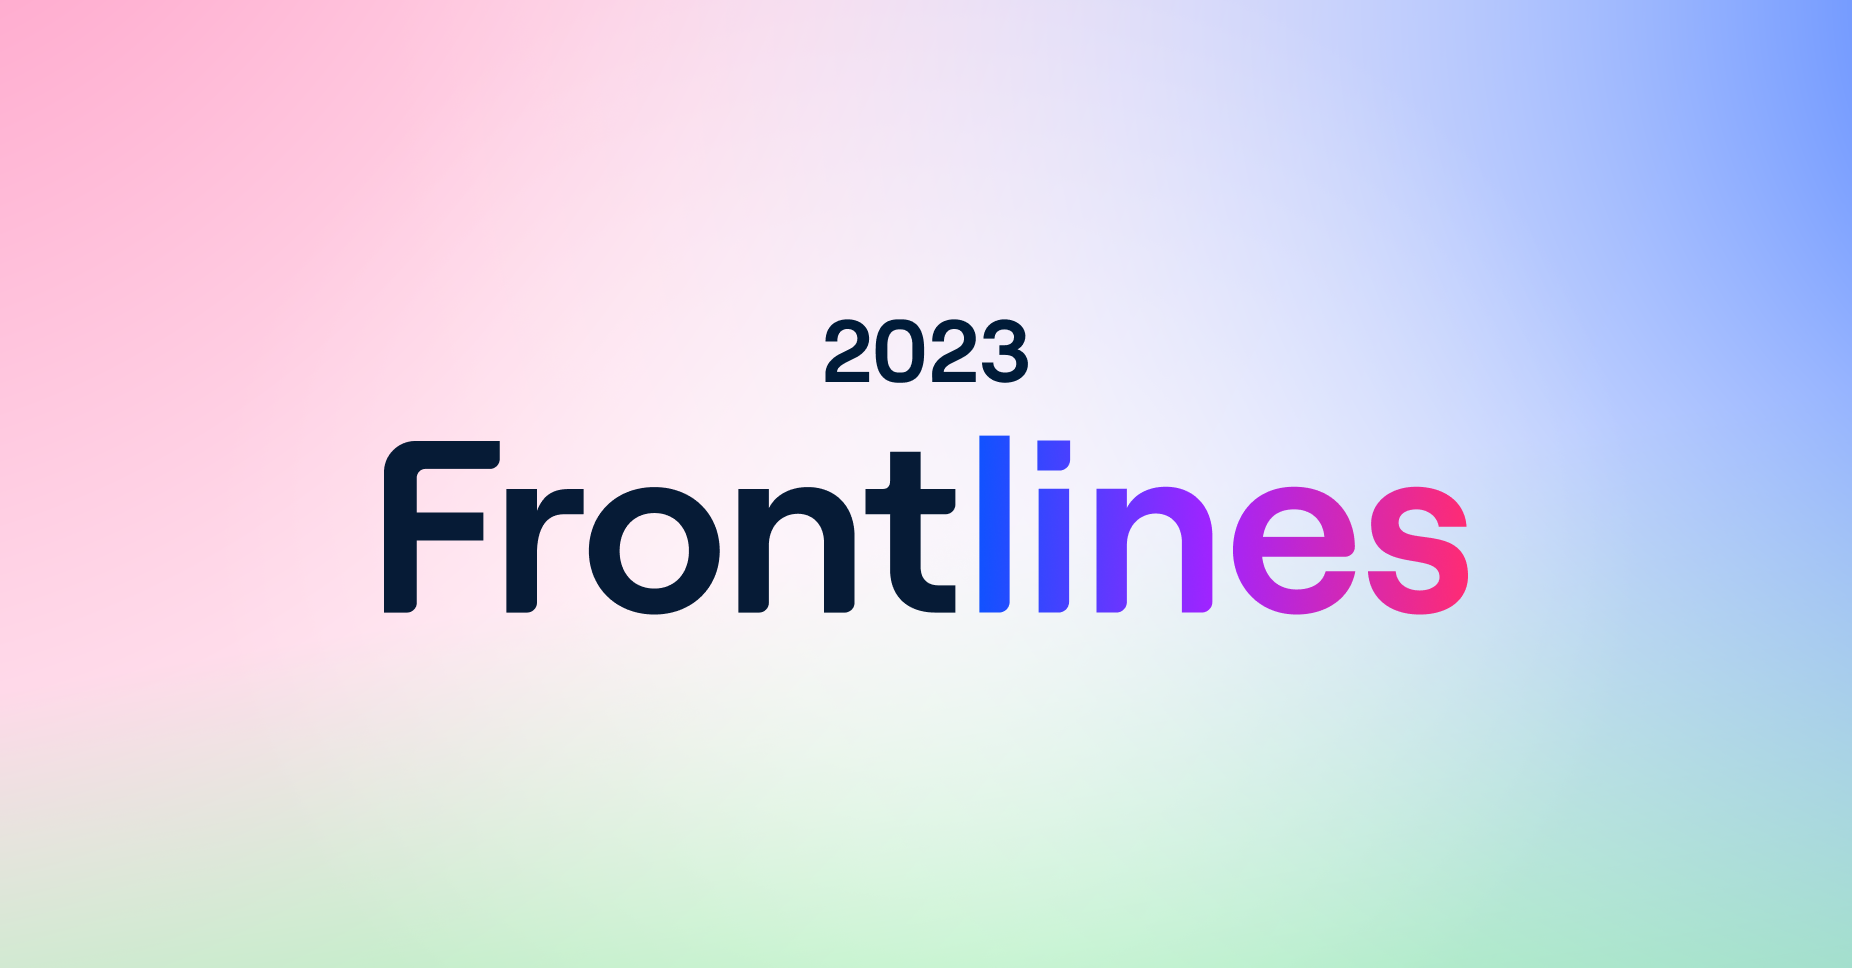 8 features we launched at Frontlines